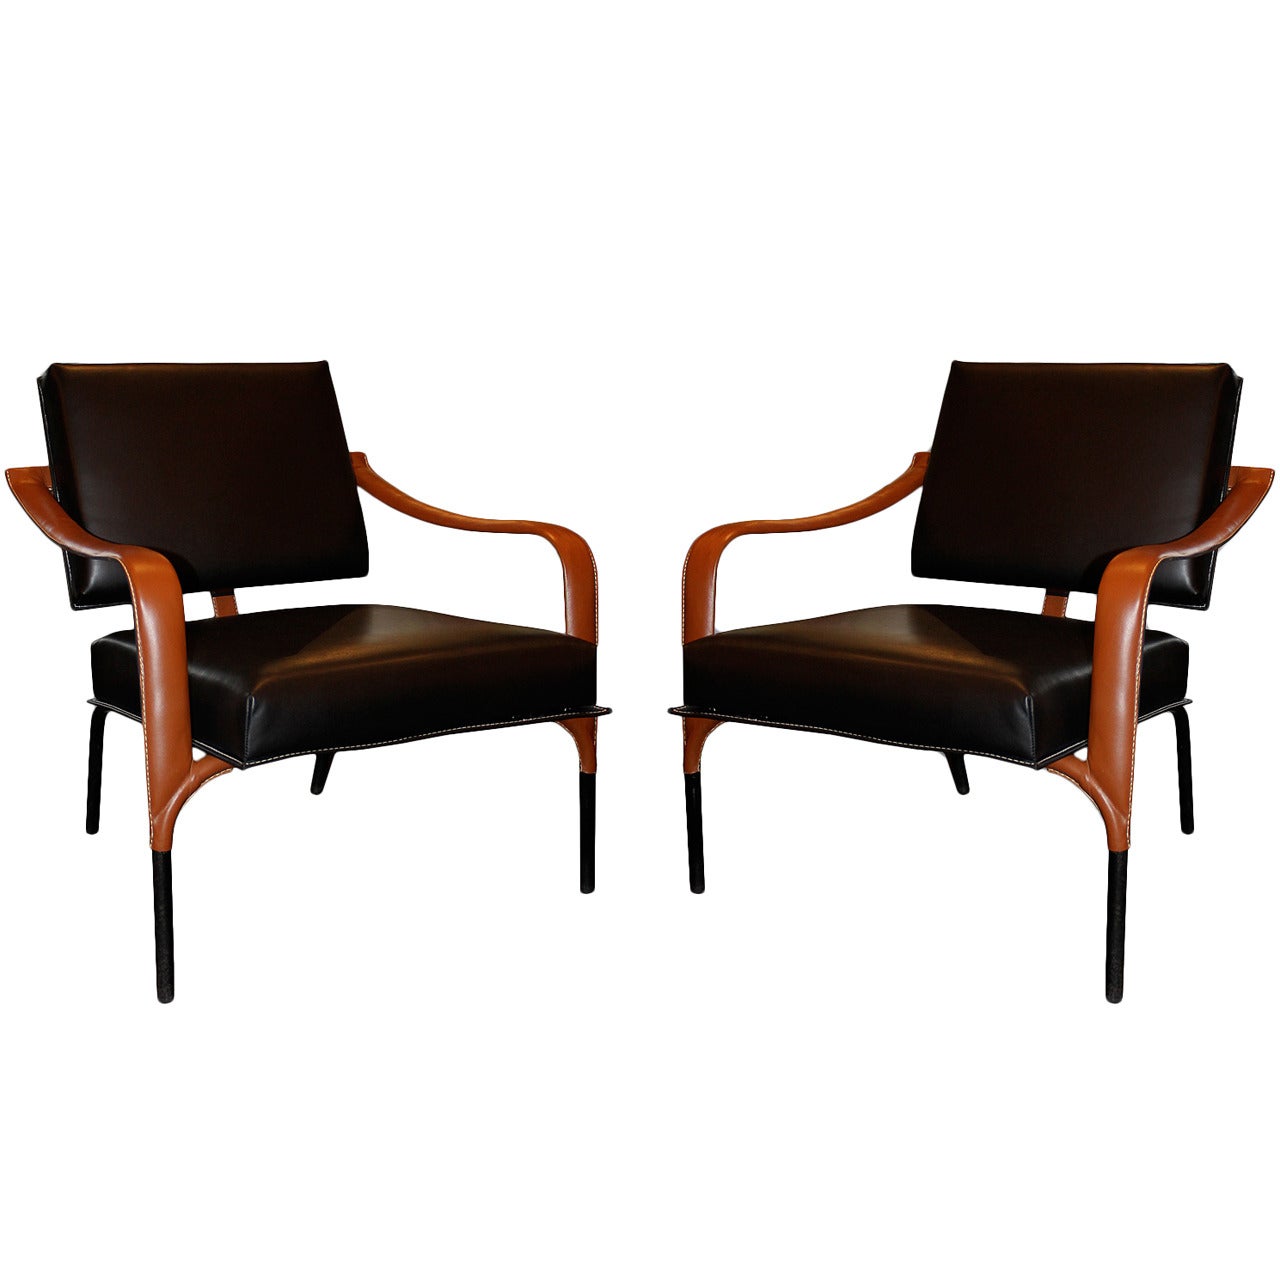 Jacques Adnet Pair of Leather Lounge Chairs, France, circa 1955